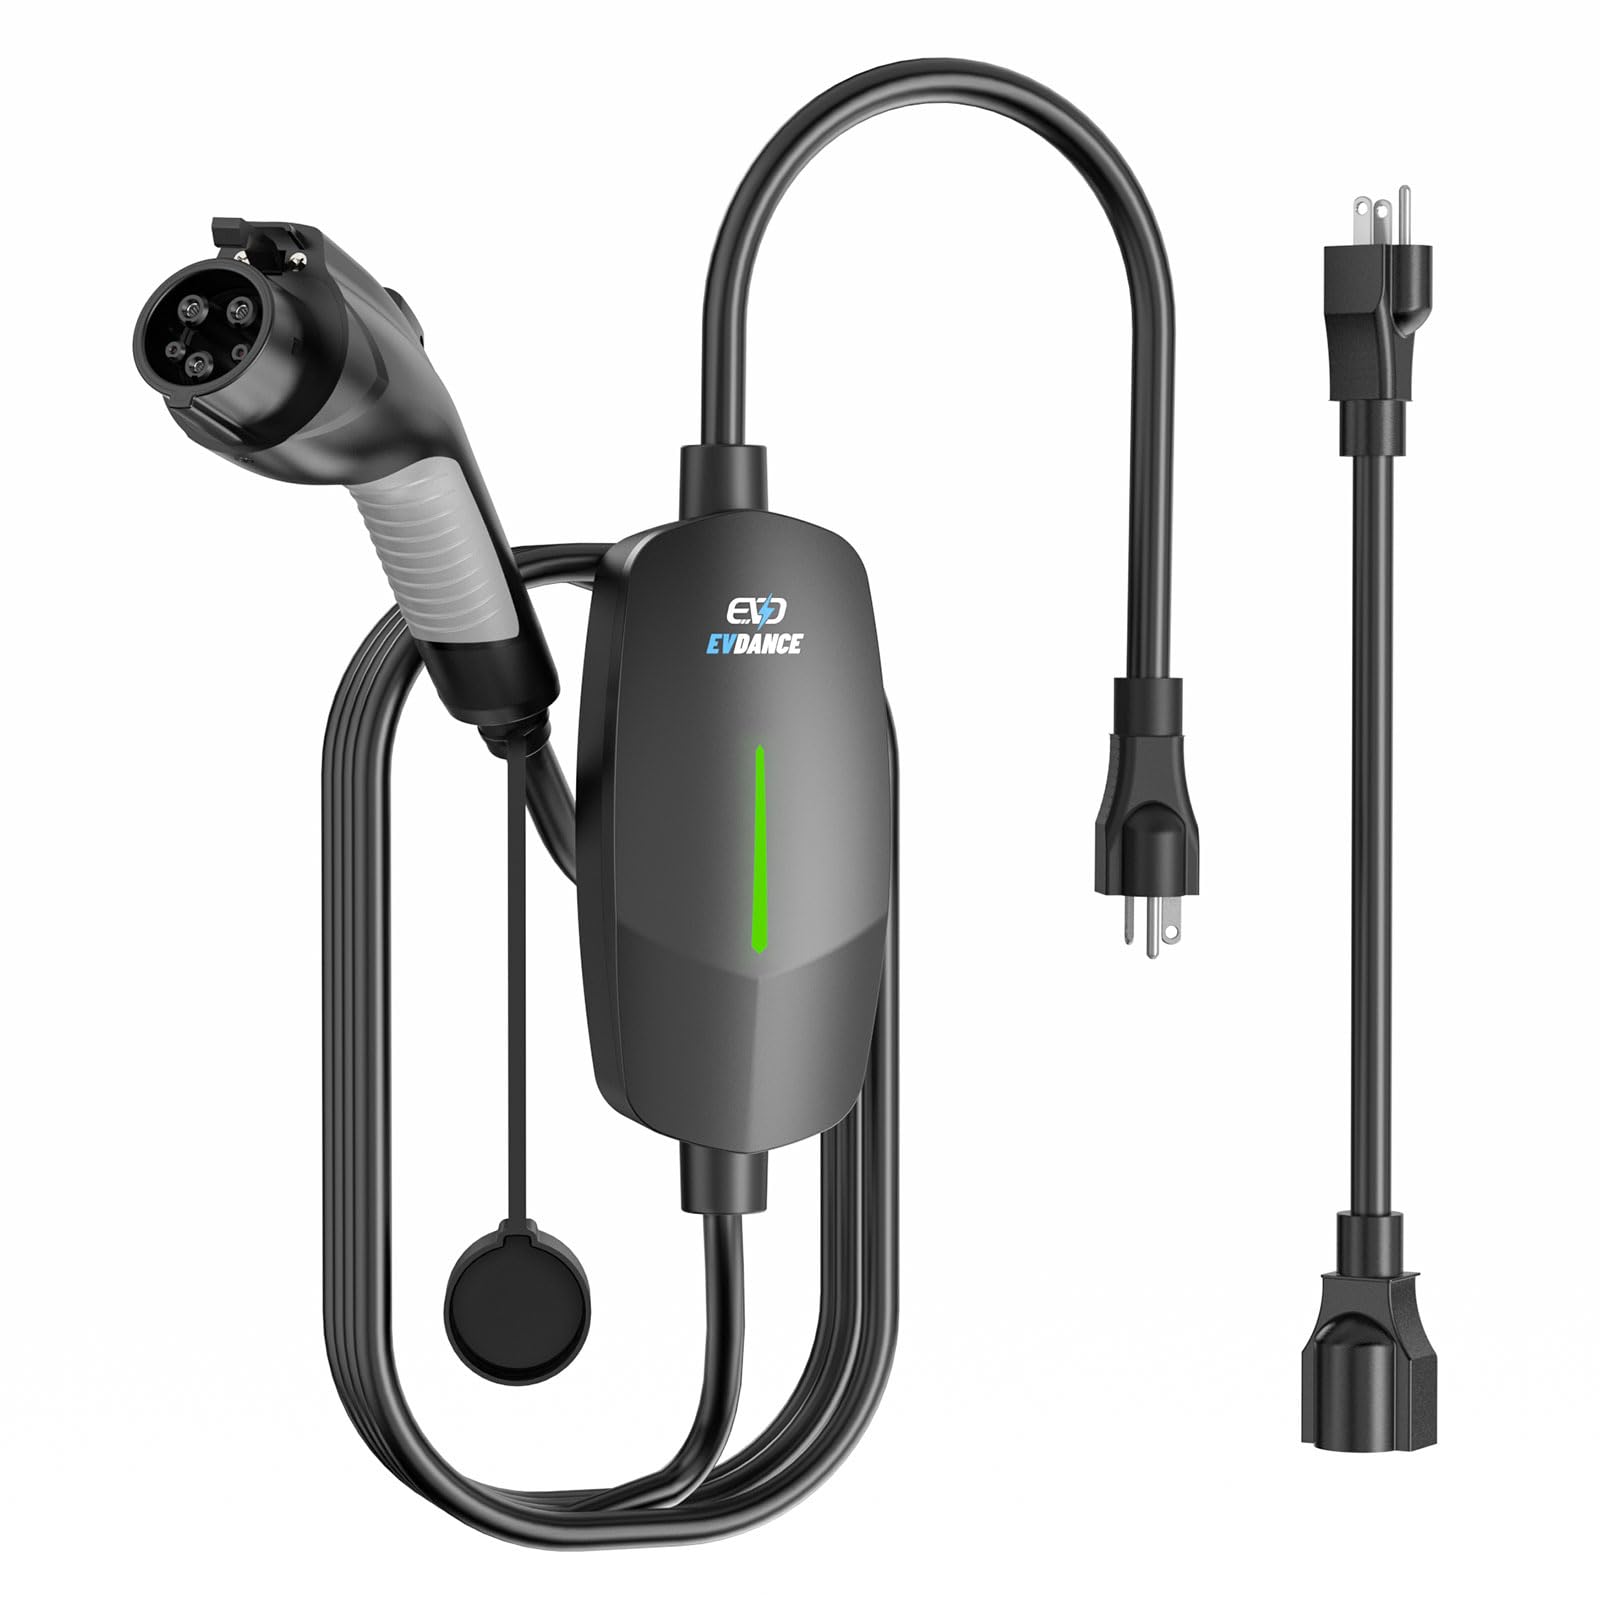 Level 1 Black Electric Vehicle Portable Charger By EVDANCE